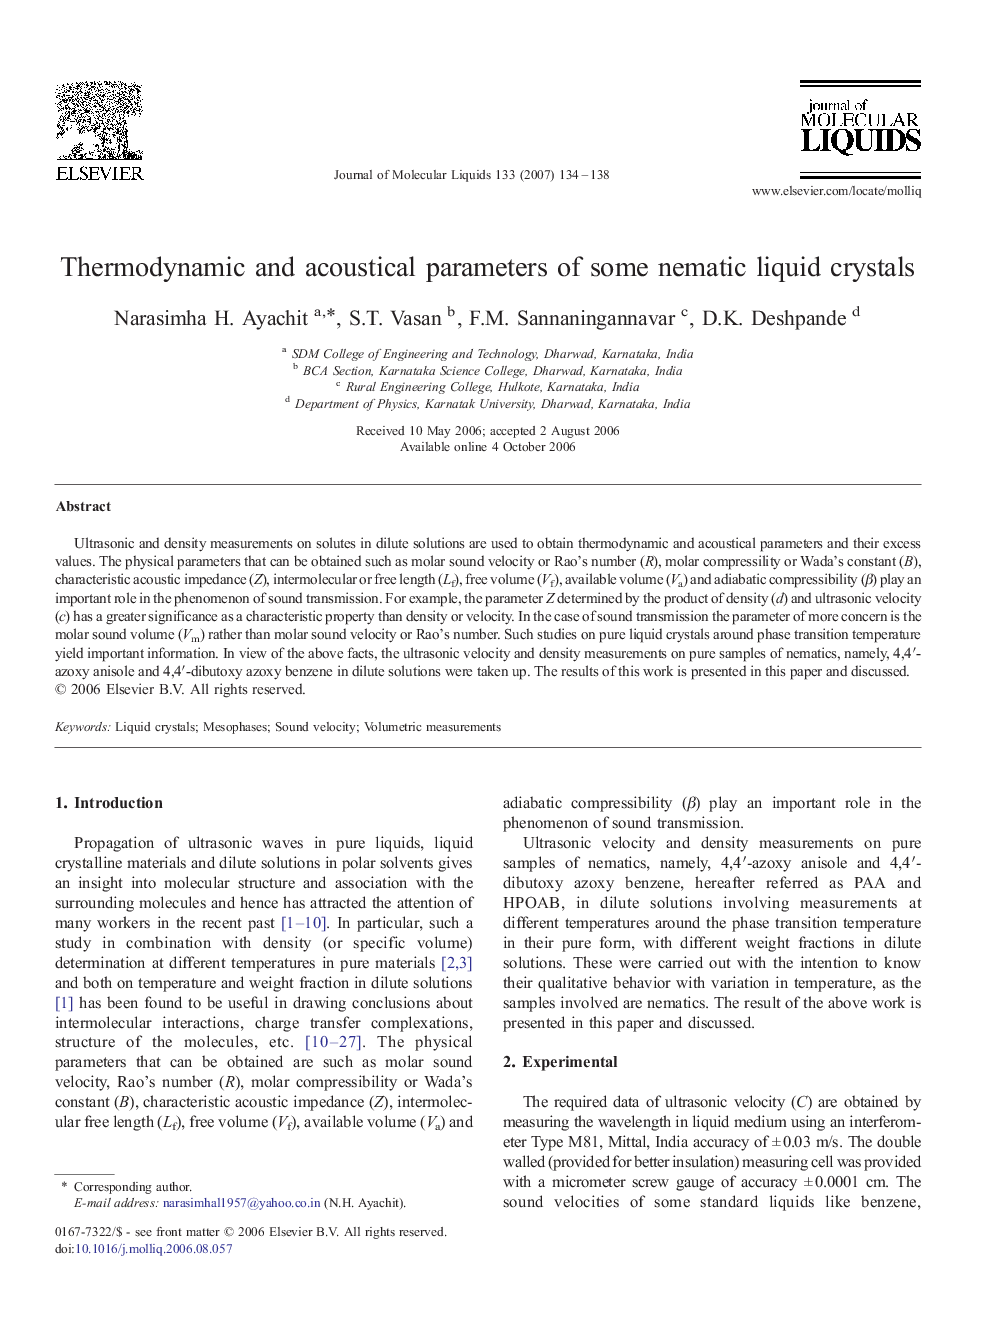 Thermodynamic and acoustical parameters of some nematic liquid crystals